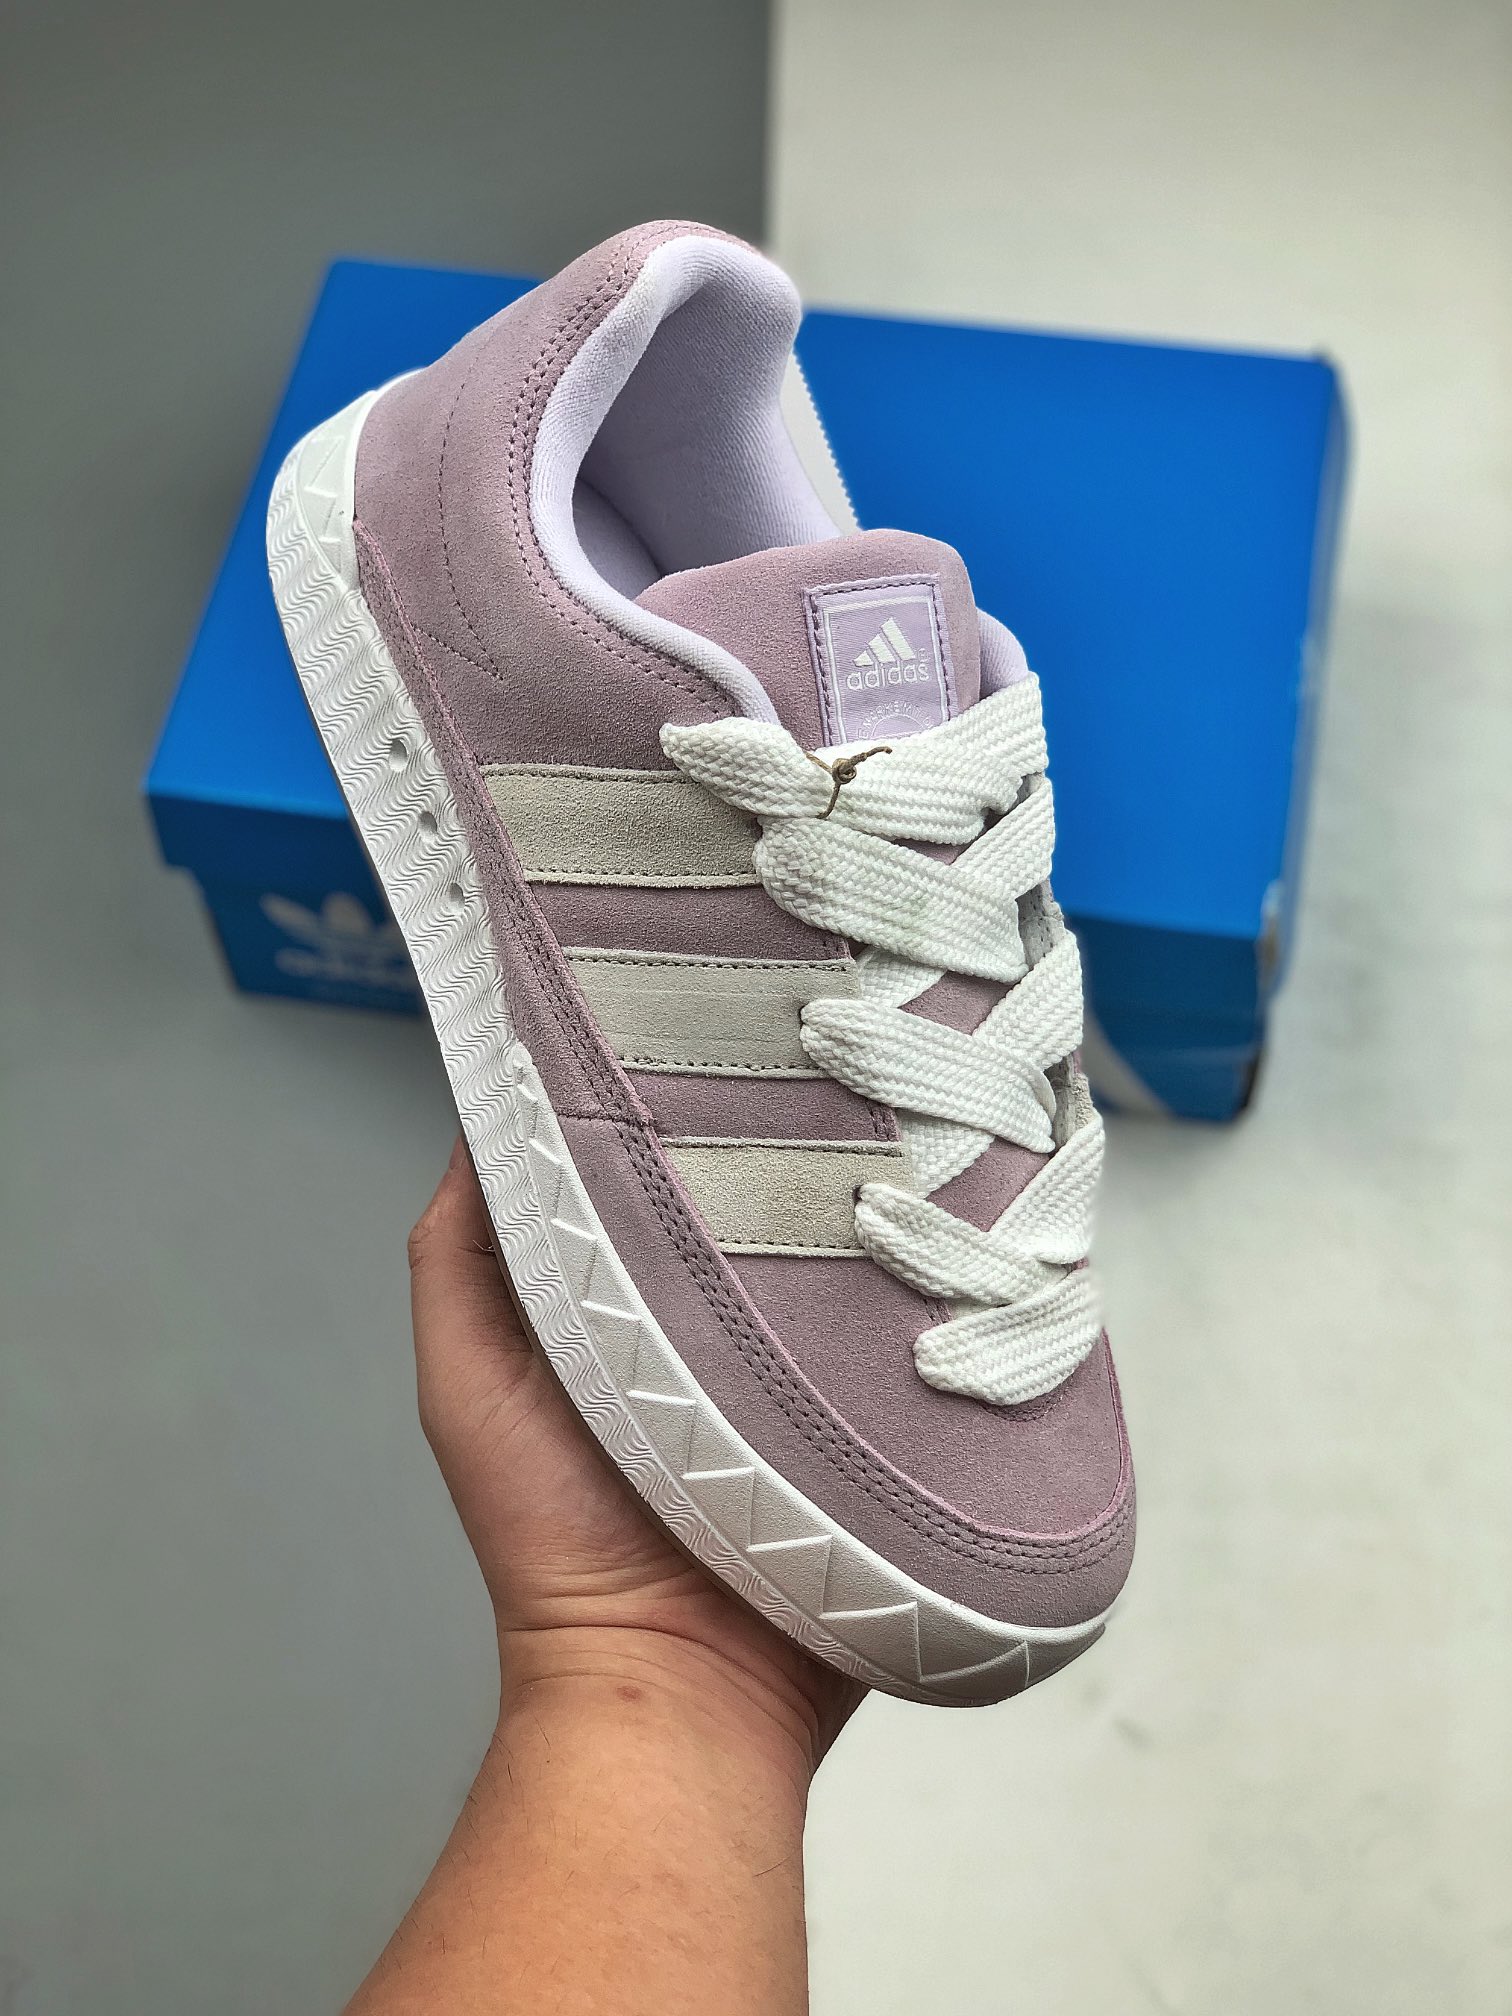 Adidas Adimatic Light Purple Light Gray GY2089 - Stylish and Functional Athletic Sneakers